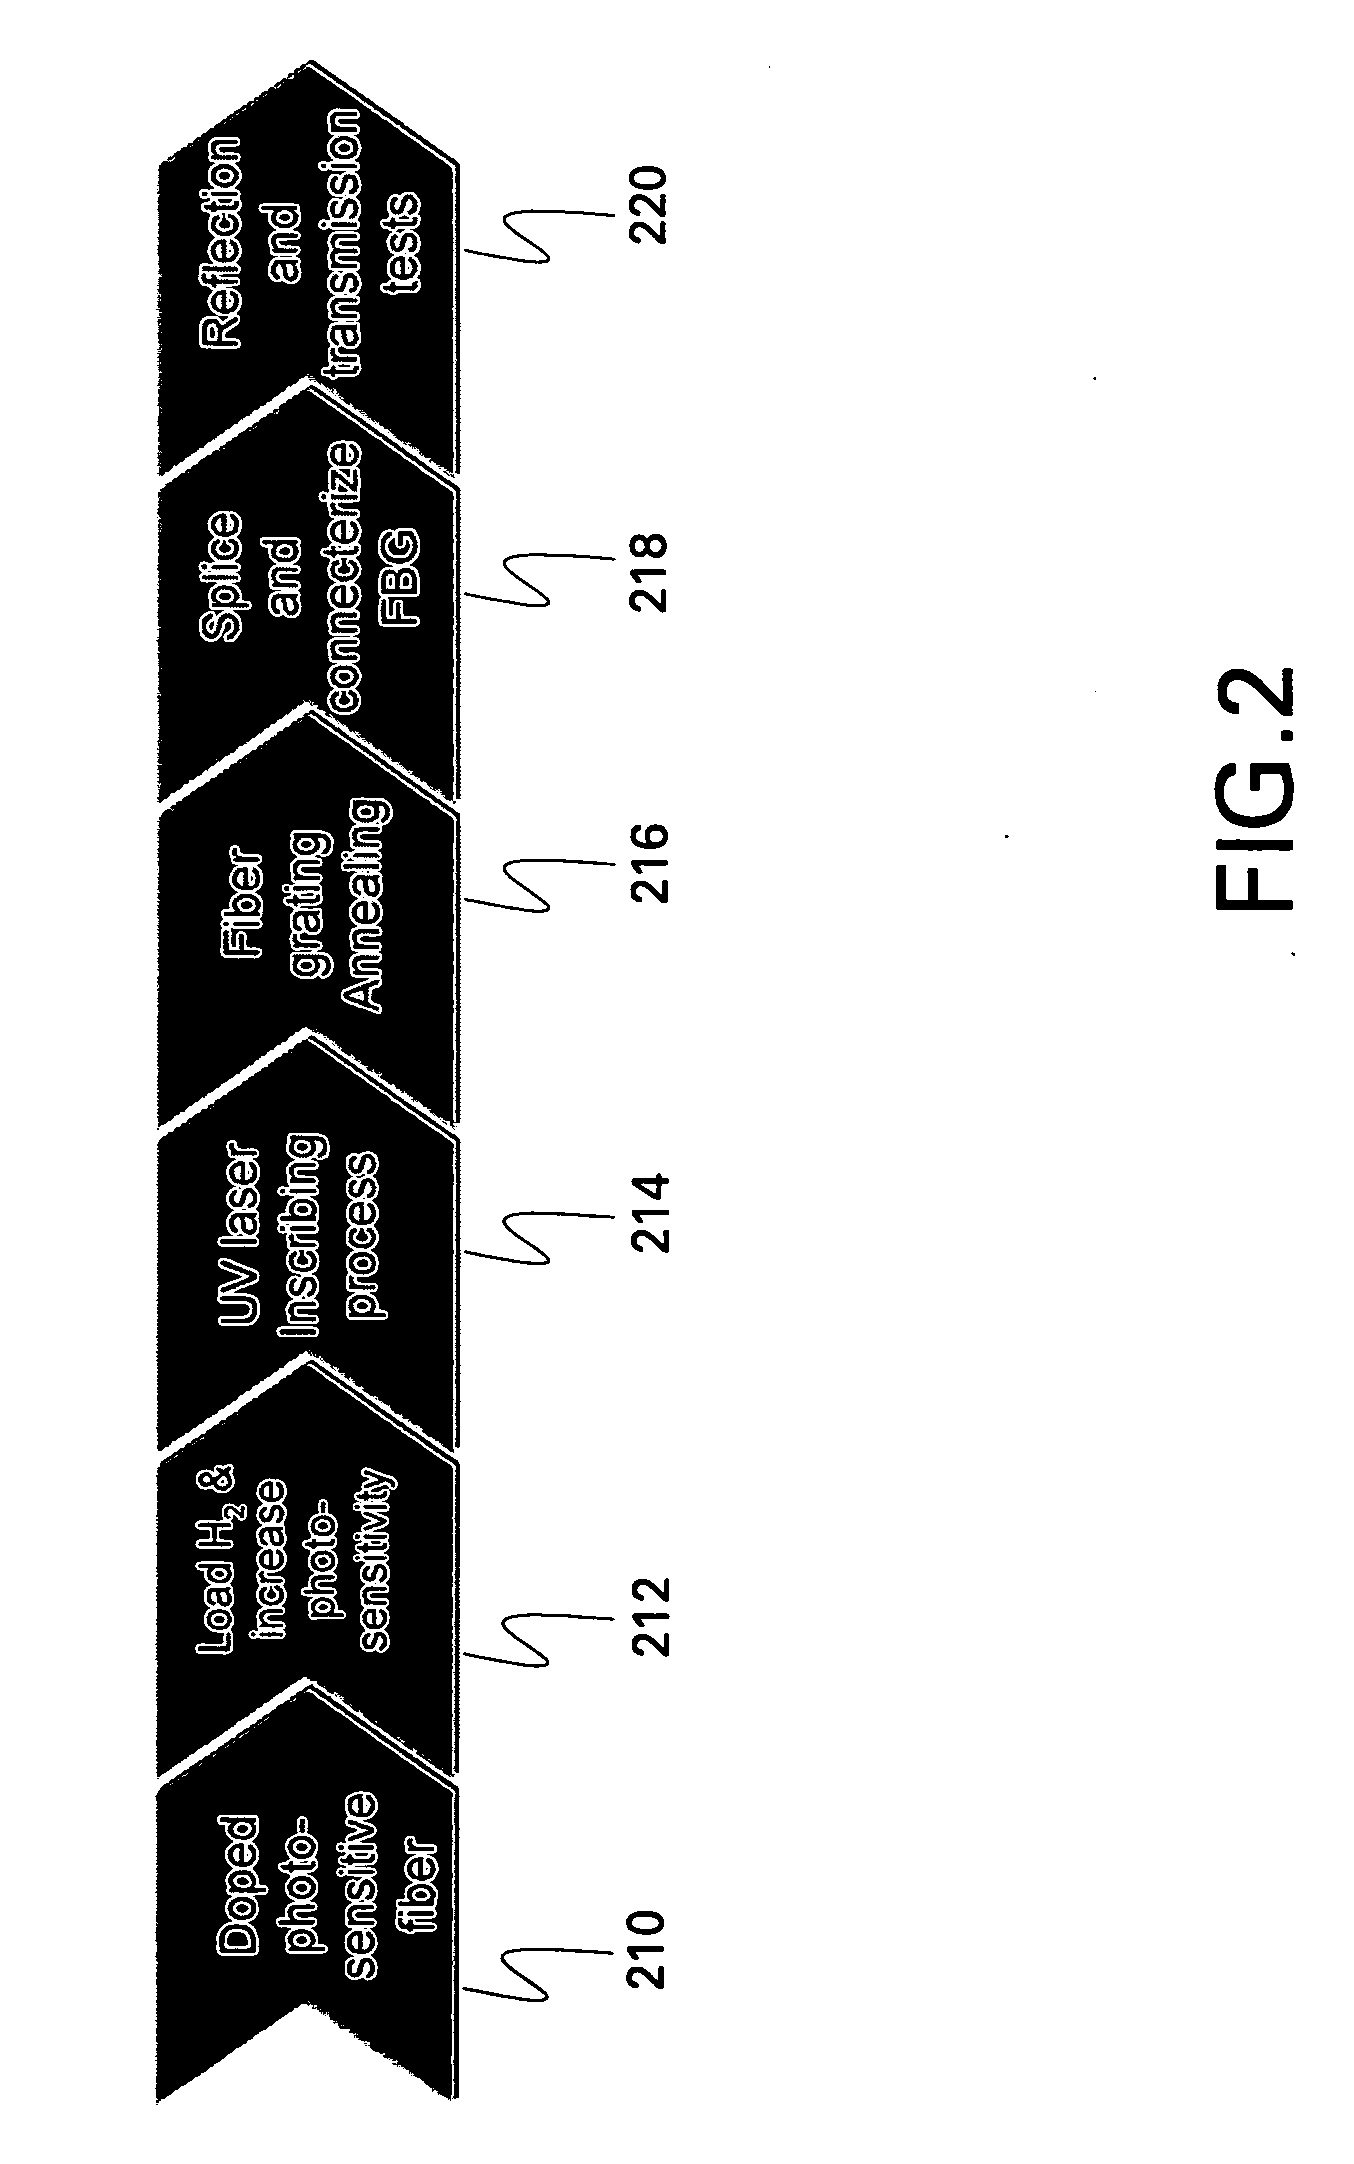 Fiber optic sensing device and method of making and operating the same